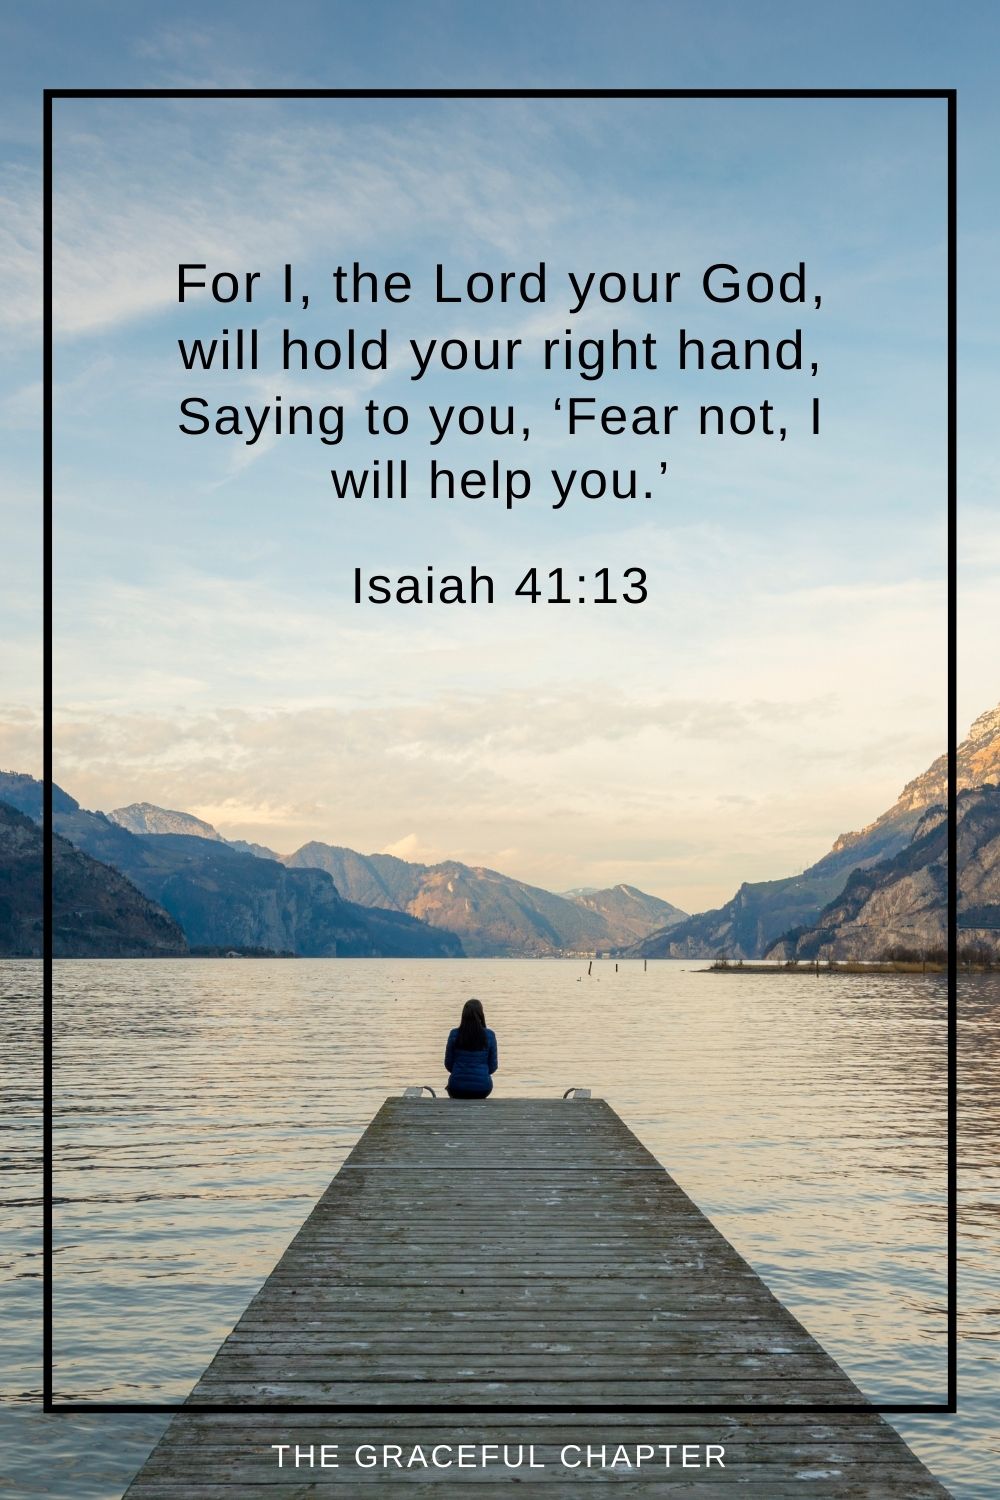 For I, the Lord your God, will hold your right hand, Saying to you, ‘Fear not, I will help you.’ Isaiah 41:13